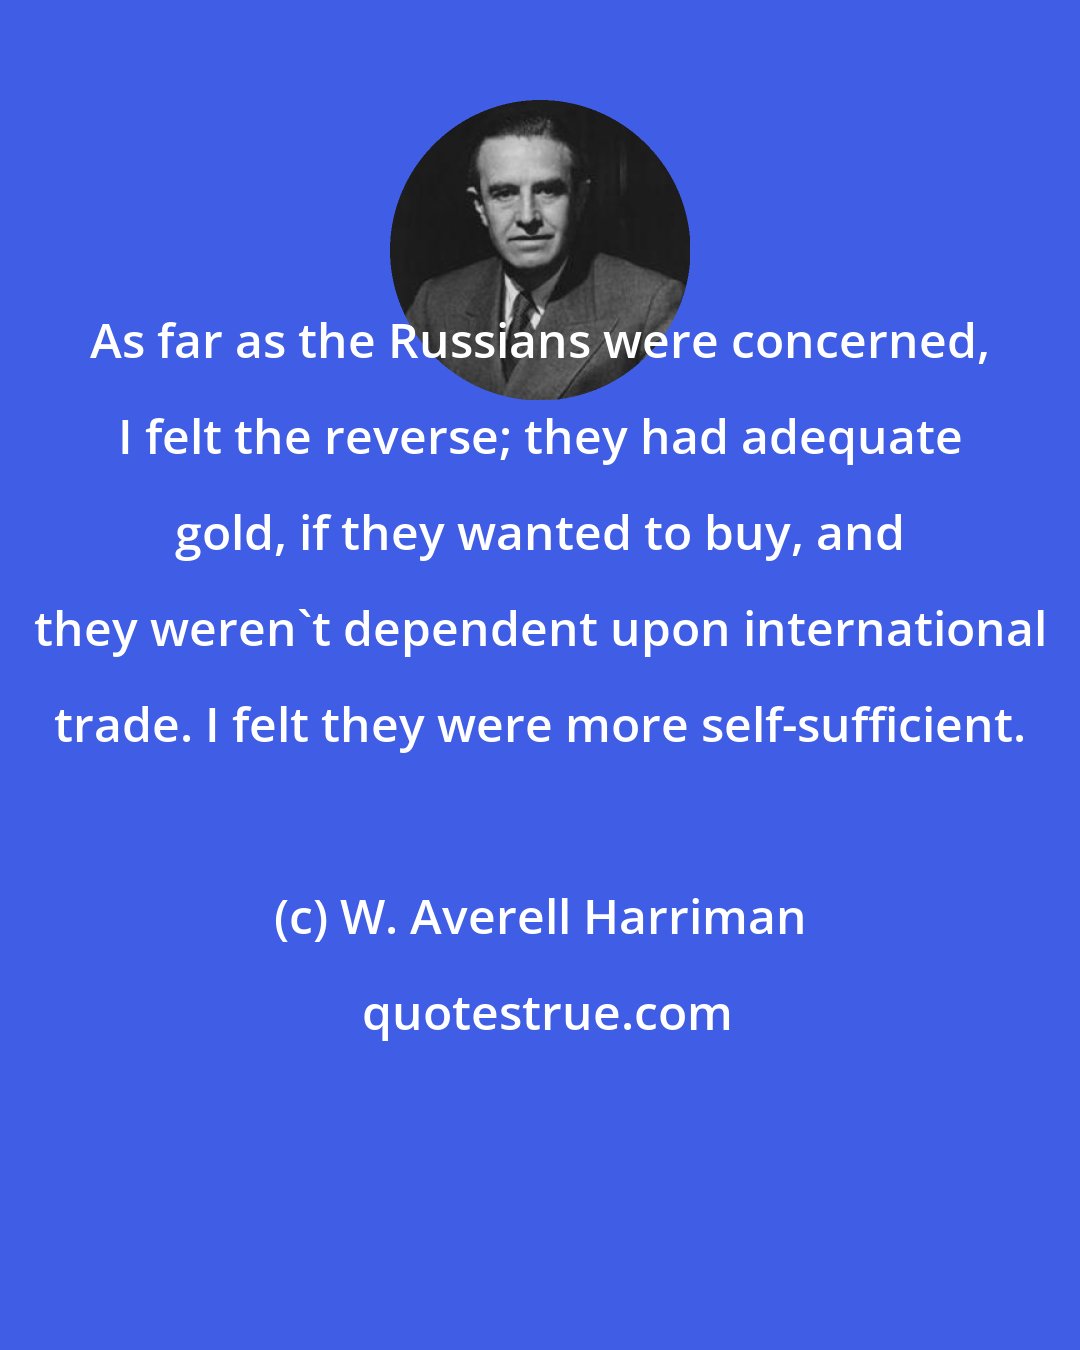 W. Averell Harriman: As far as the Russians were concerned, I felt the reverse; they had adequate gold, if they wanted to buy, and they weren't dependent upon international trade. I felt they were more self-sufficient.